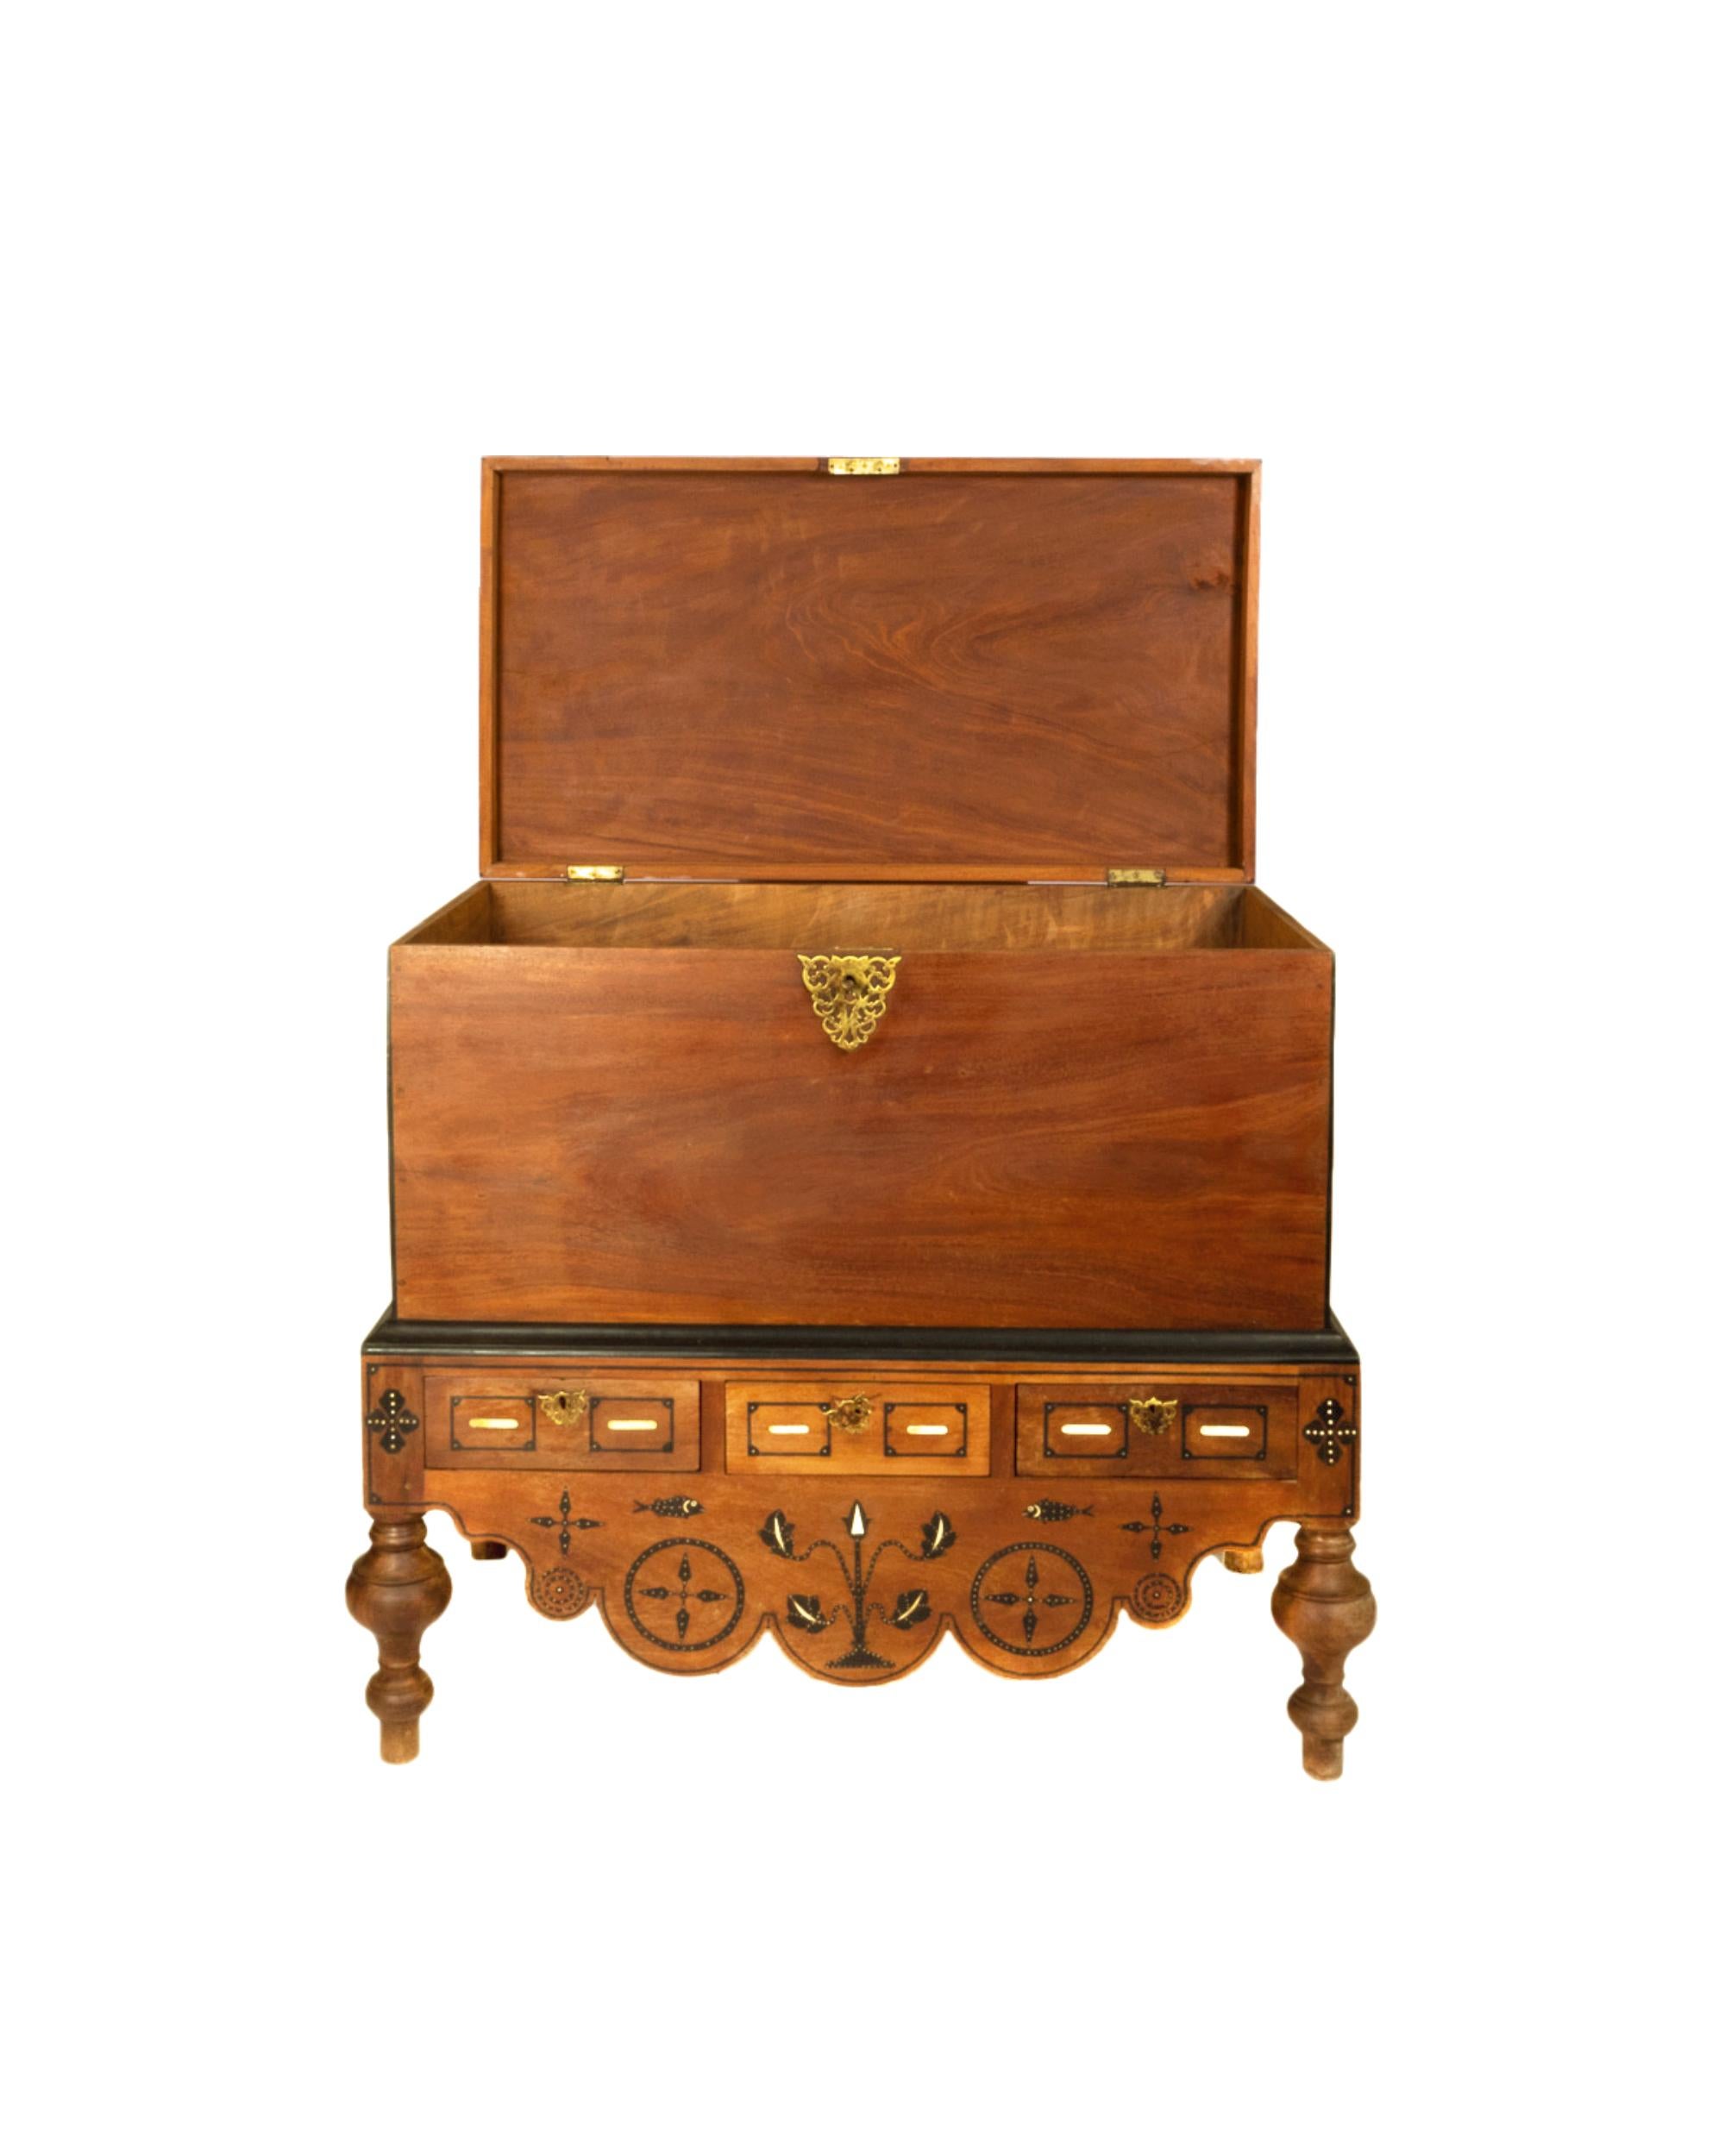 A stately Dutch Colonial chest in East Indian Satinwood, with hand turned legs, ebony trim, inlay, and brass accents and highly crafted marquetry in the lower section of the chest and lateral brass handles.  
The front has a deep, carved scalloped